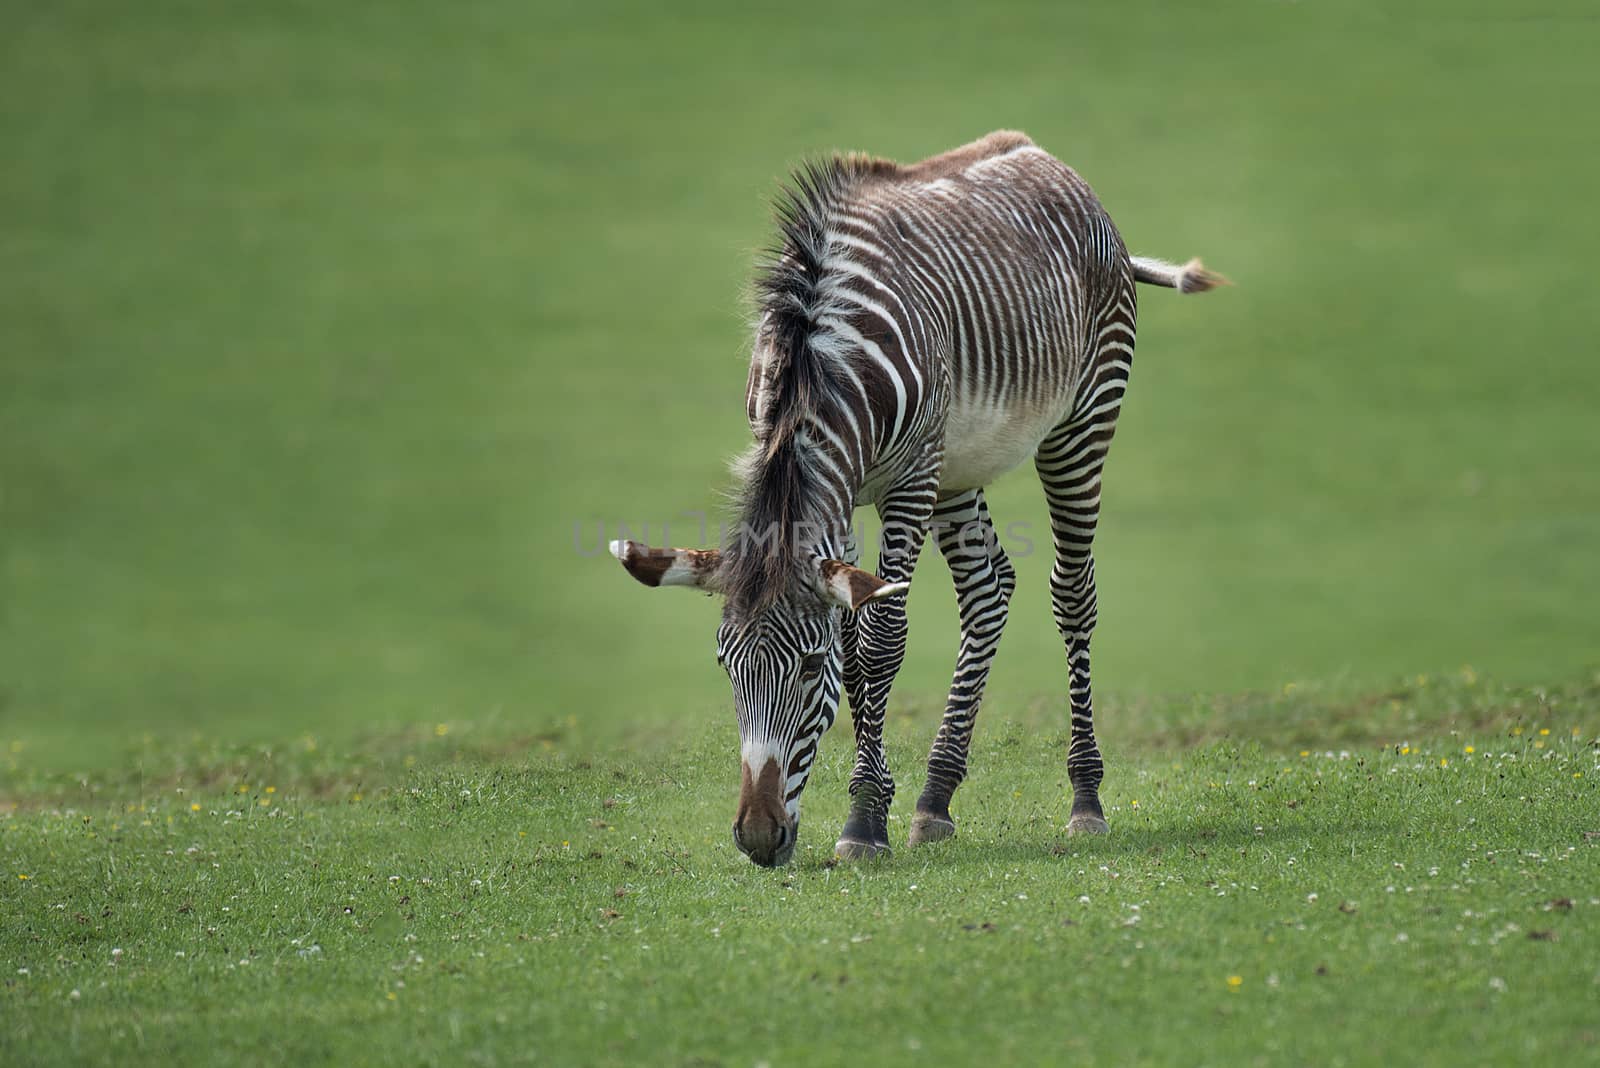 An isolated zebra on grass grazing with its head down eating